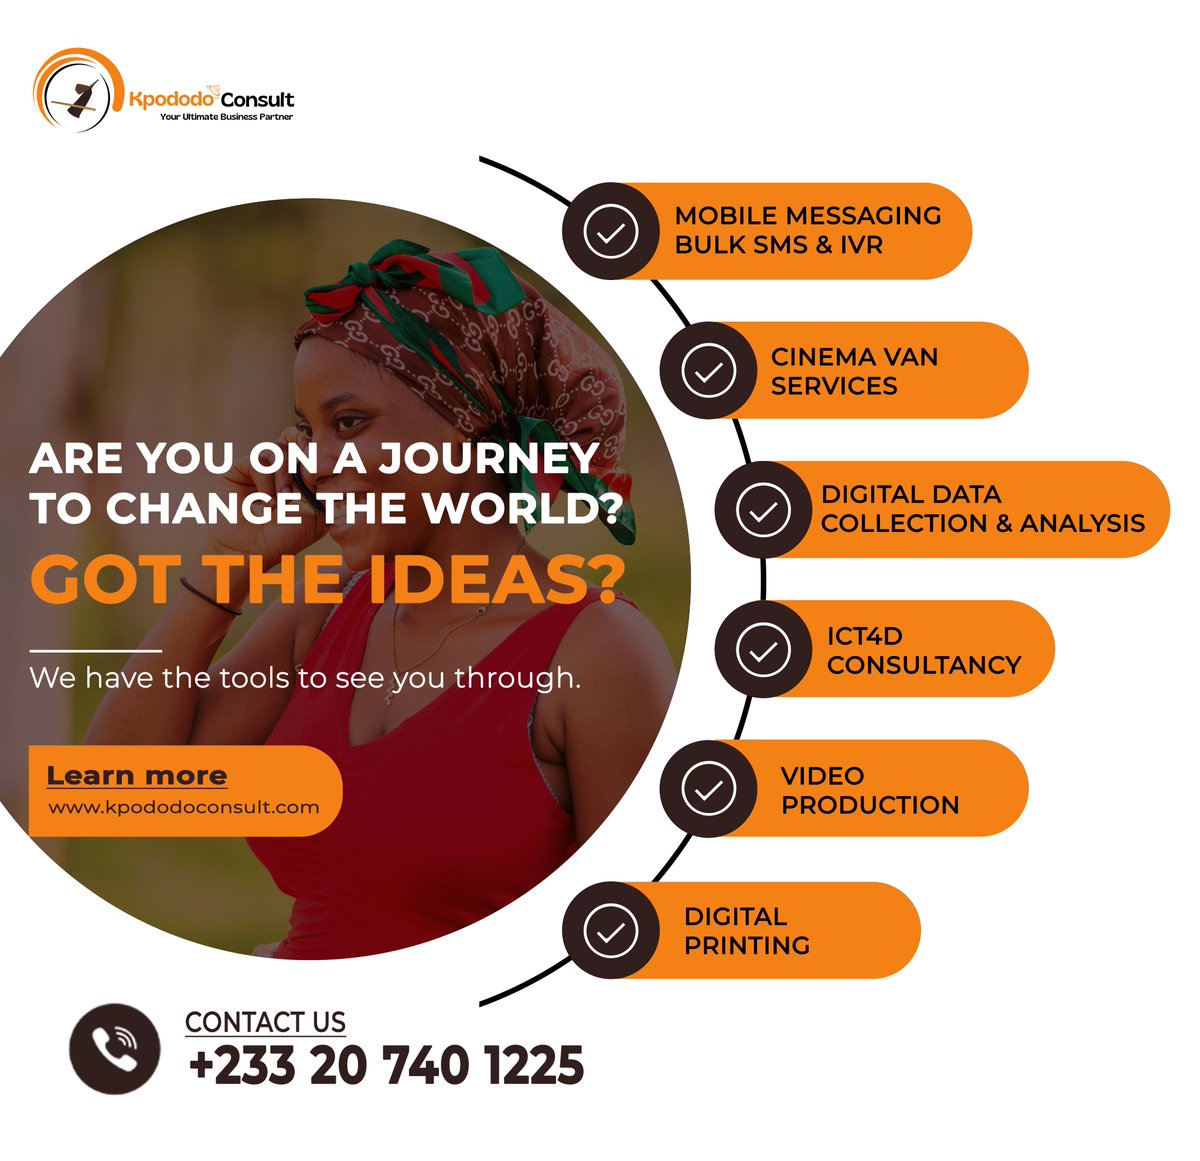 Are you on a journey to change the world? Kpododo Consult has the tools to help you get there!

Visit kpododoconsult.com to learn more!

#SBCC #bulksmsprovider #ivrservice #cinemavan #DataAnalytics #ICT4D #videoproduction #digitalprintingservices #FeastGhana